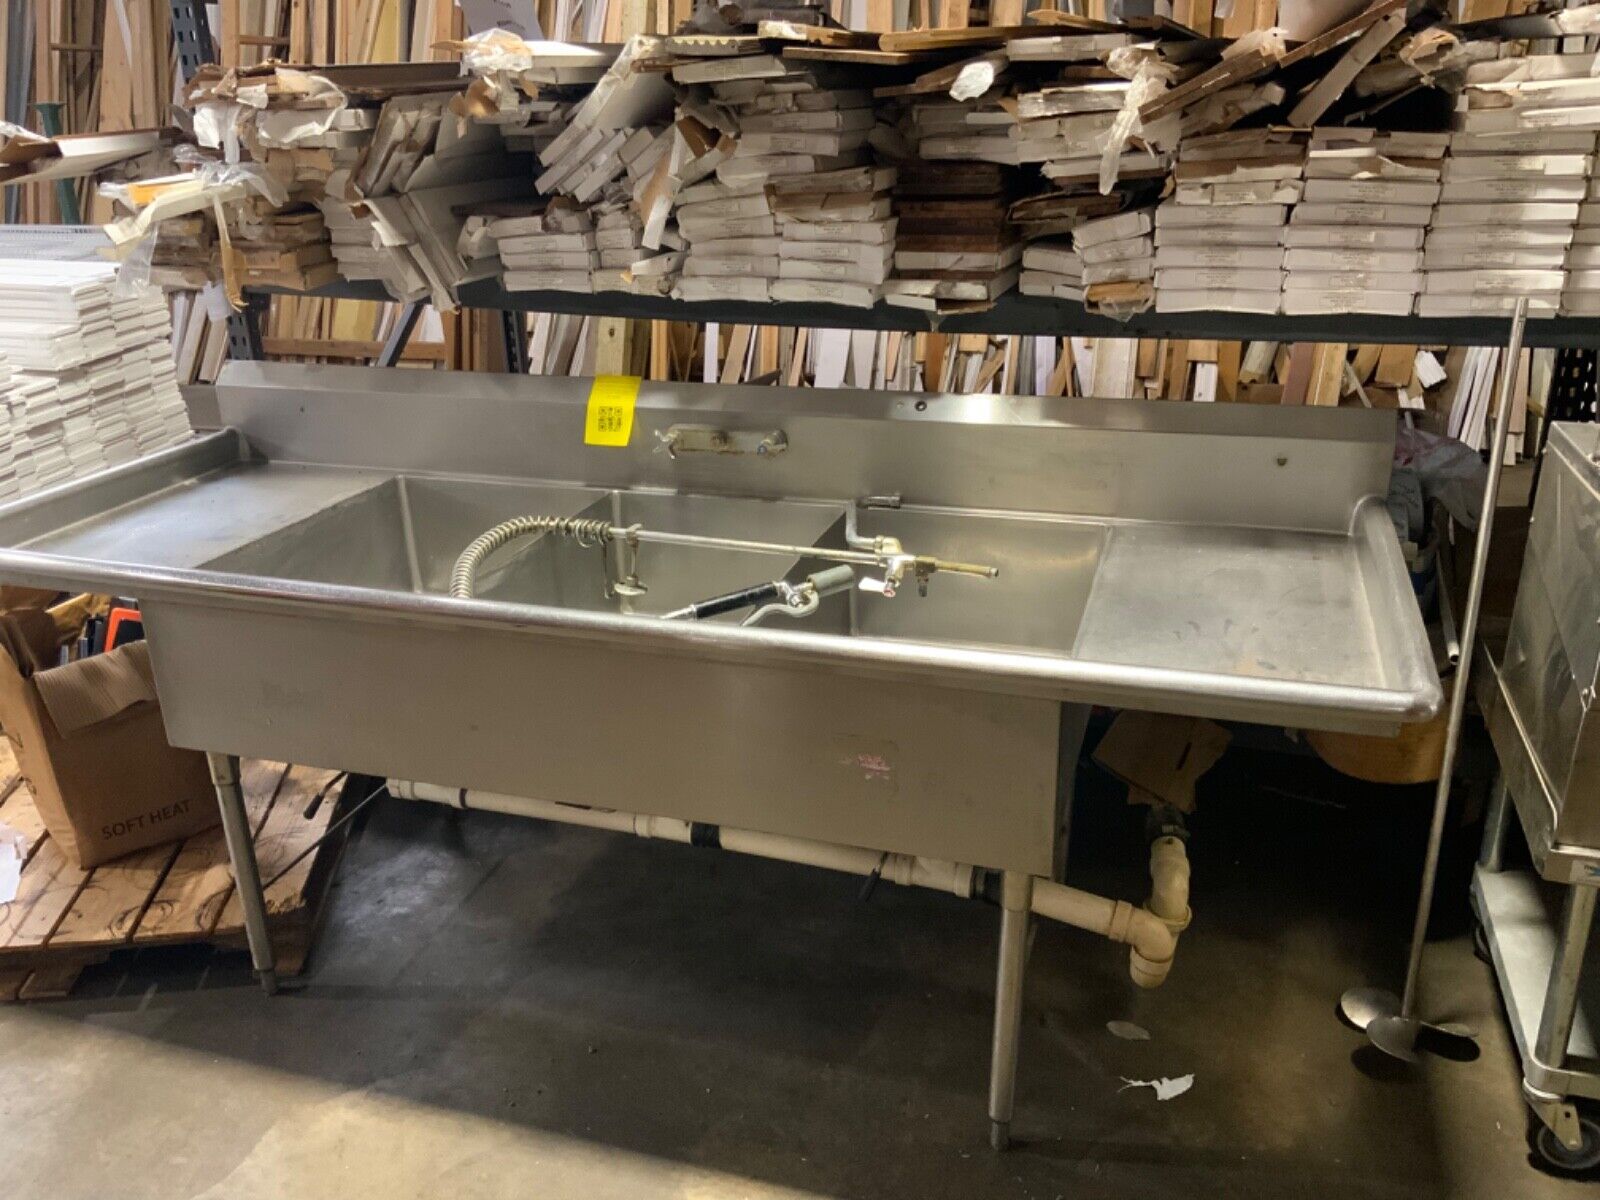 Restuarant Sink Commercial 3 Basin Stainless Steel Faucet Included